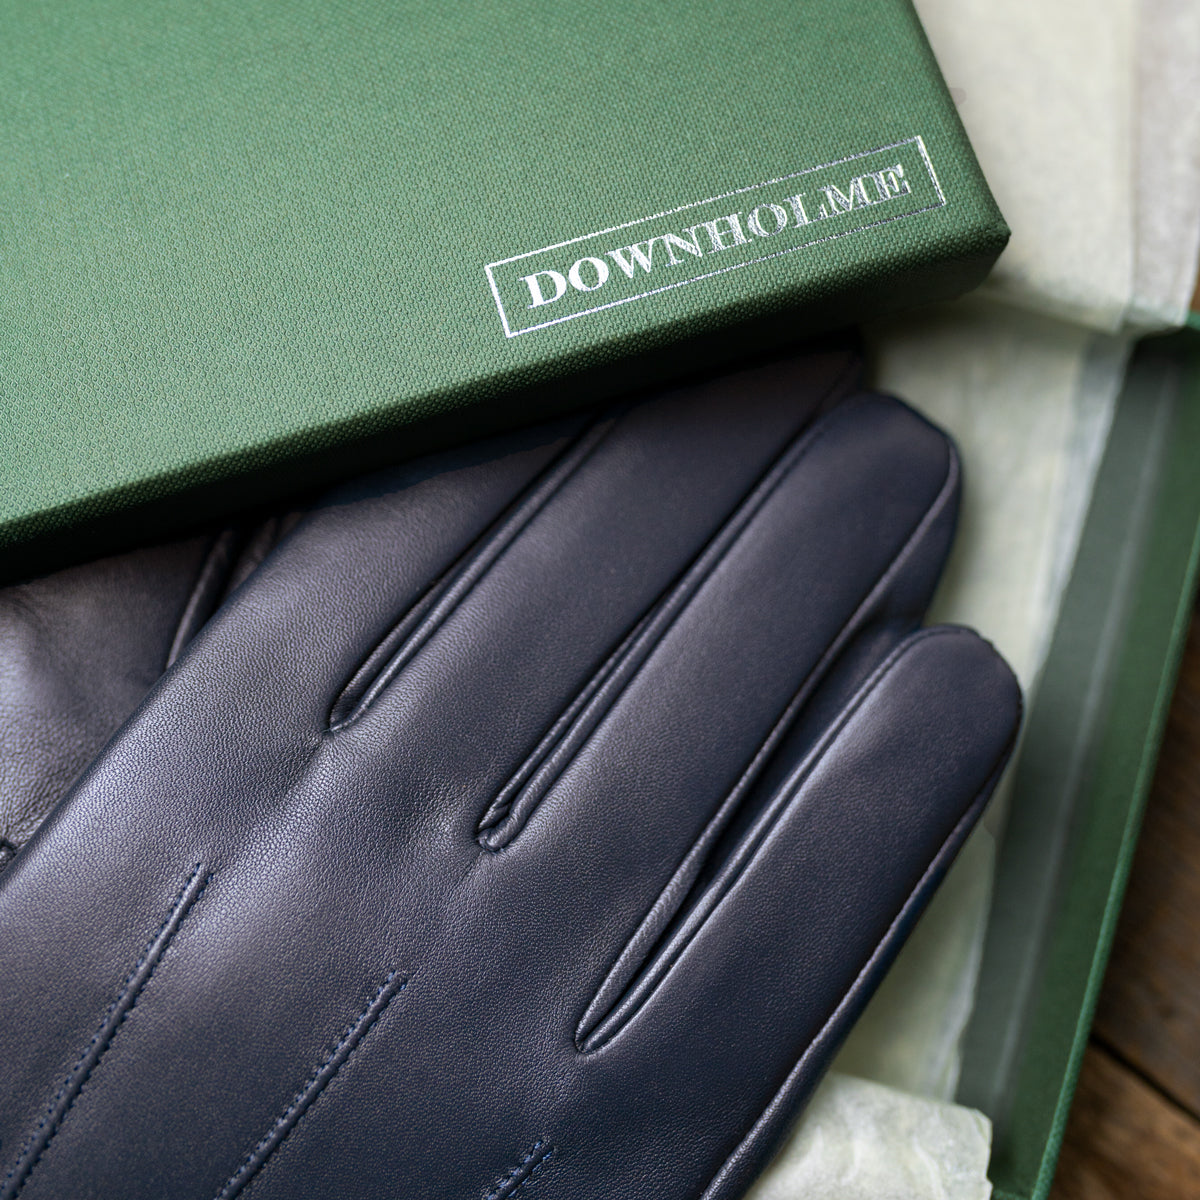 Men's Touchscreen Leather Cashmere Lined Gloves - Dark Blue – Downholme